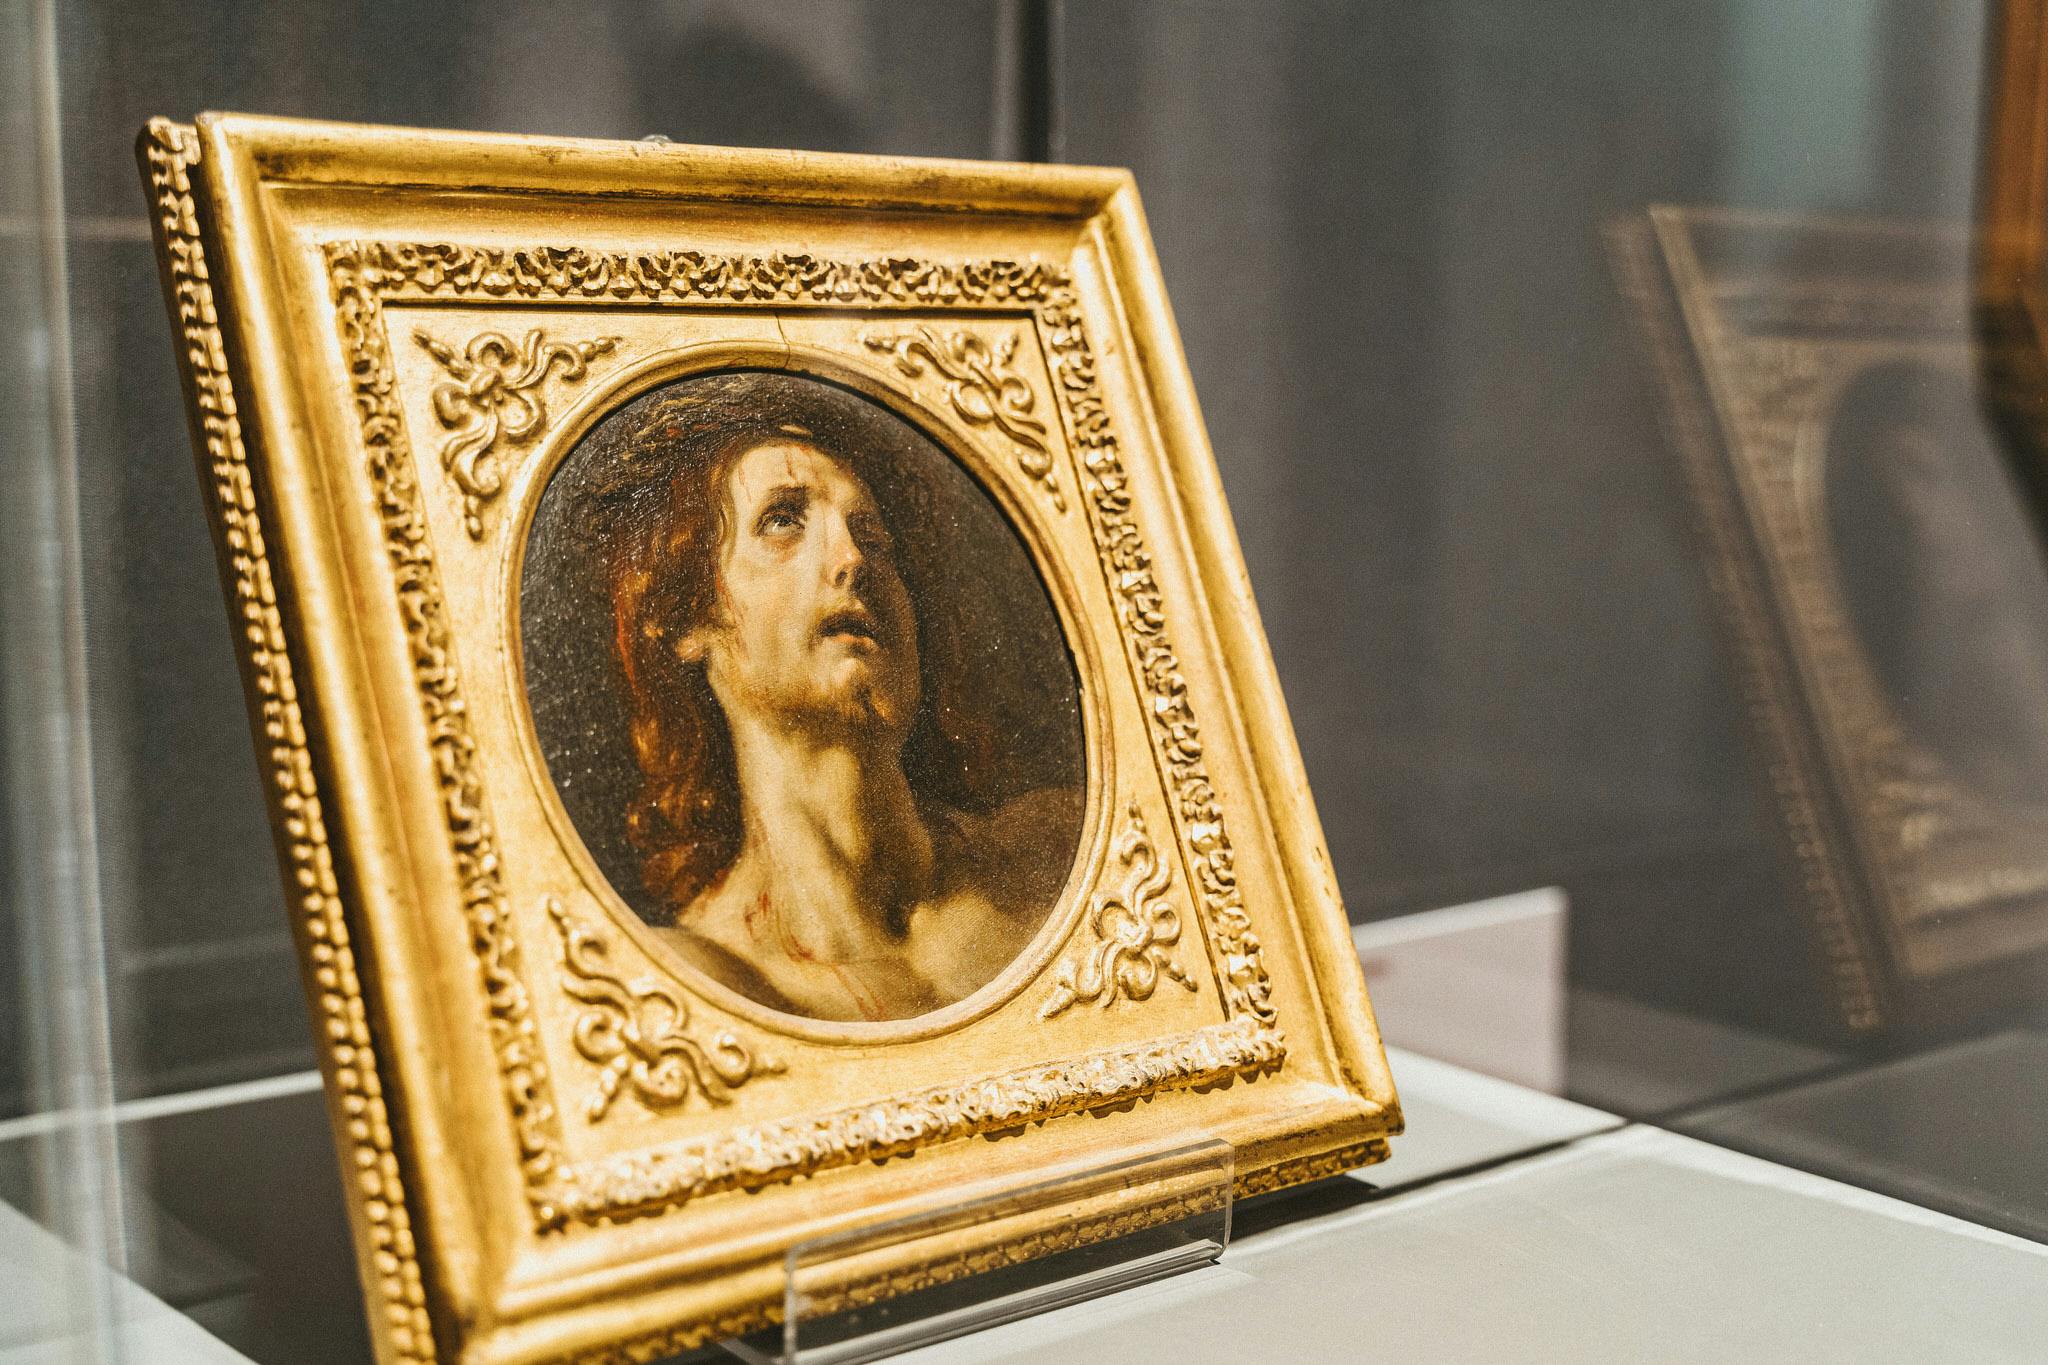 The paintings of Jacopo Vignali, from the Gallerie degli uffizi to San Casciano